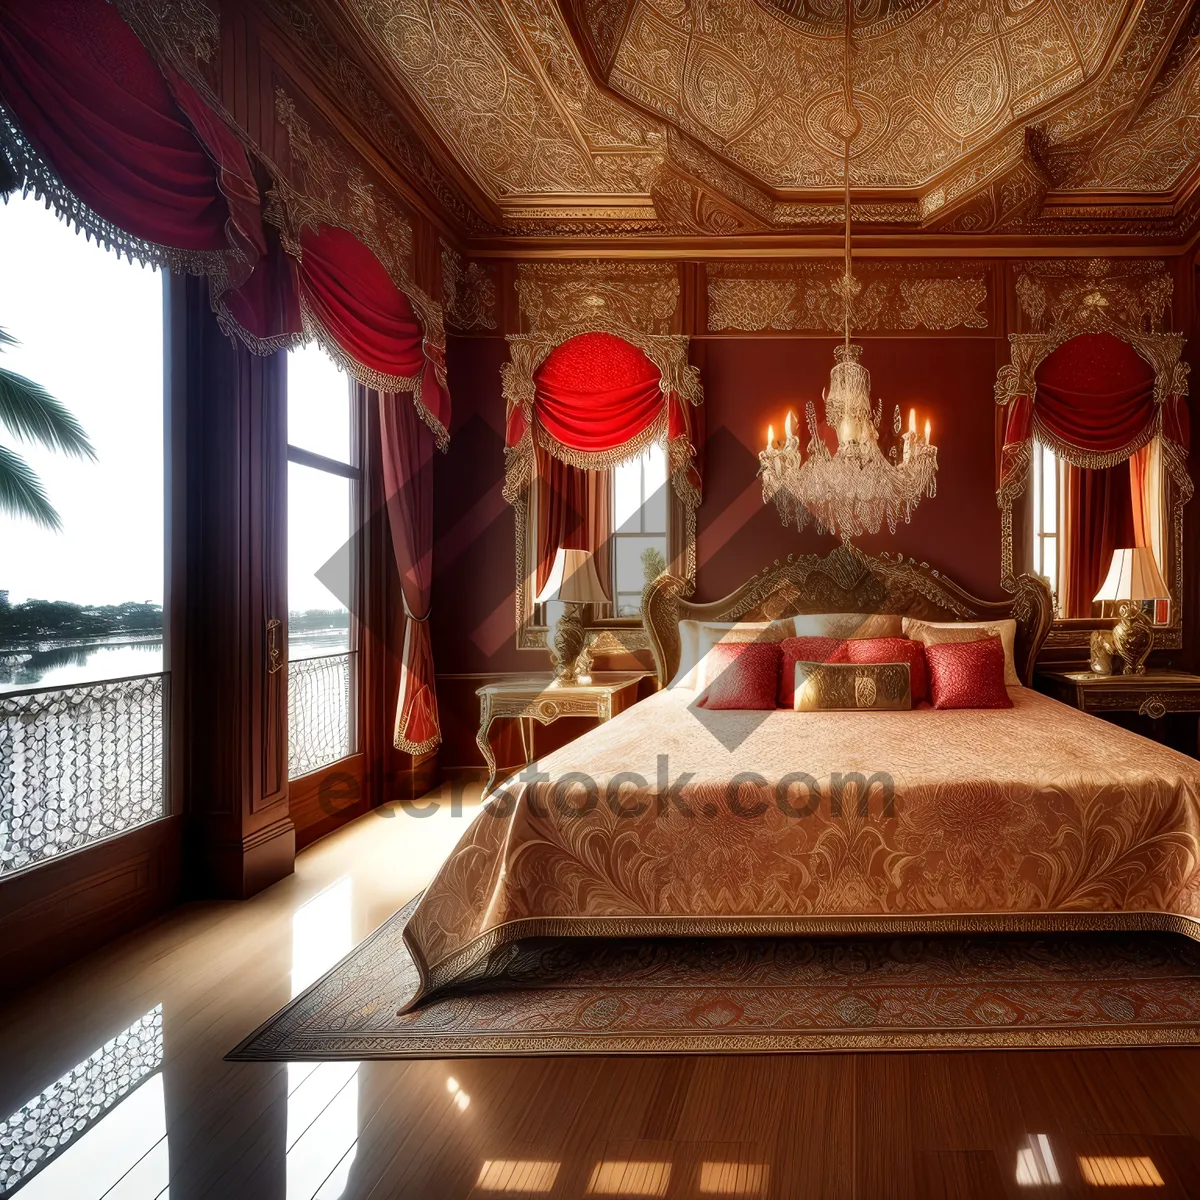 Picture of Luxurious Resort Bedroom with Four-Poster Bed